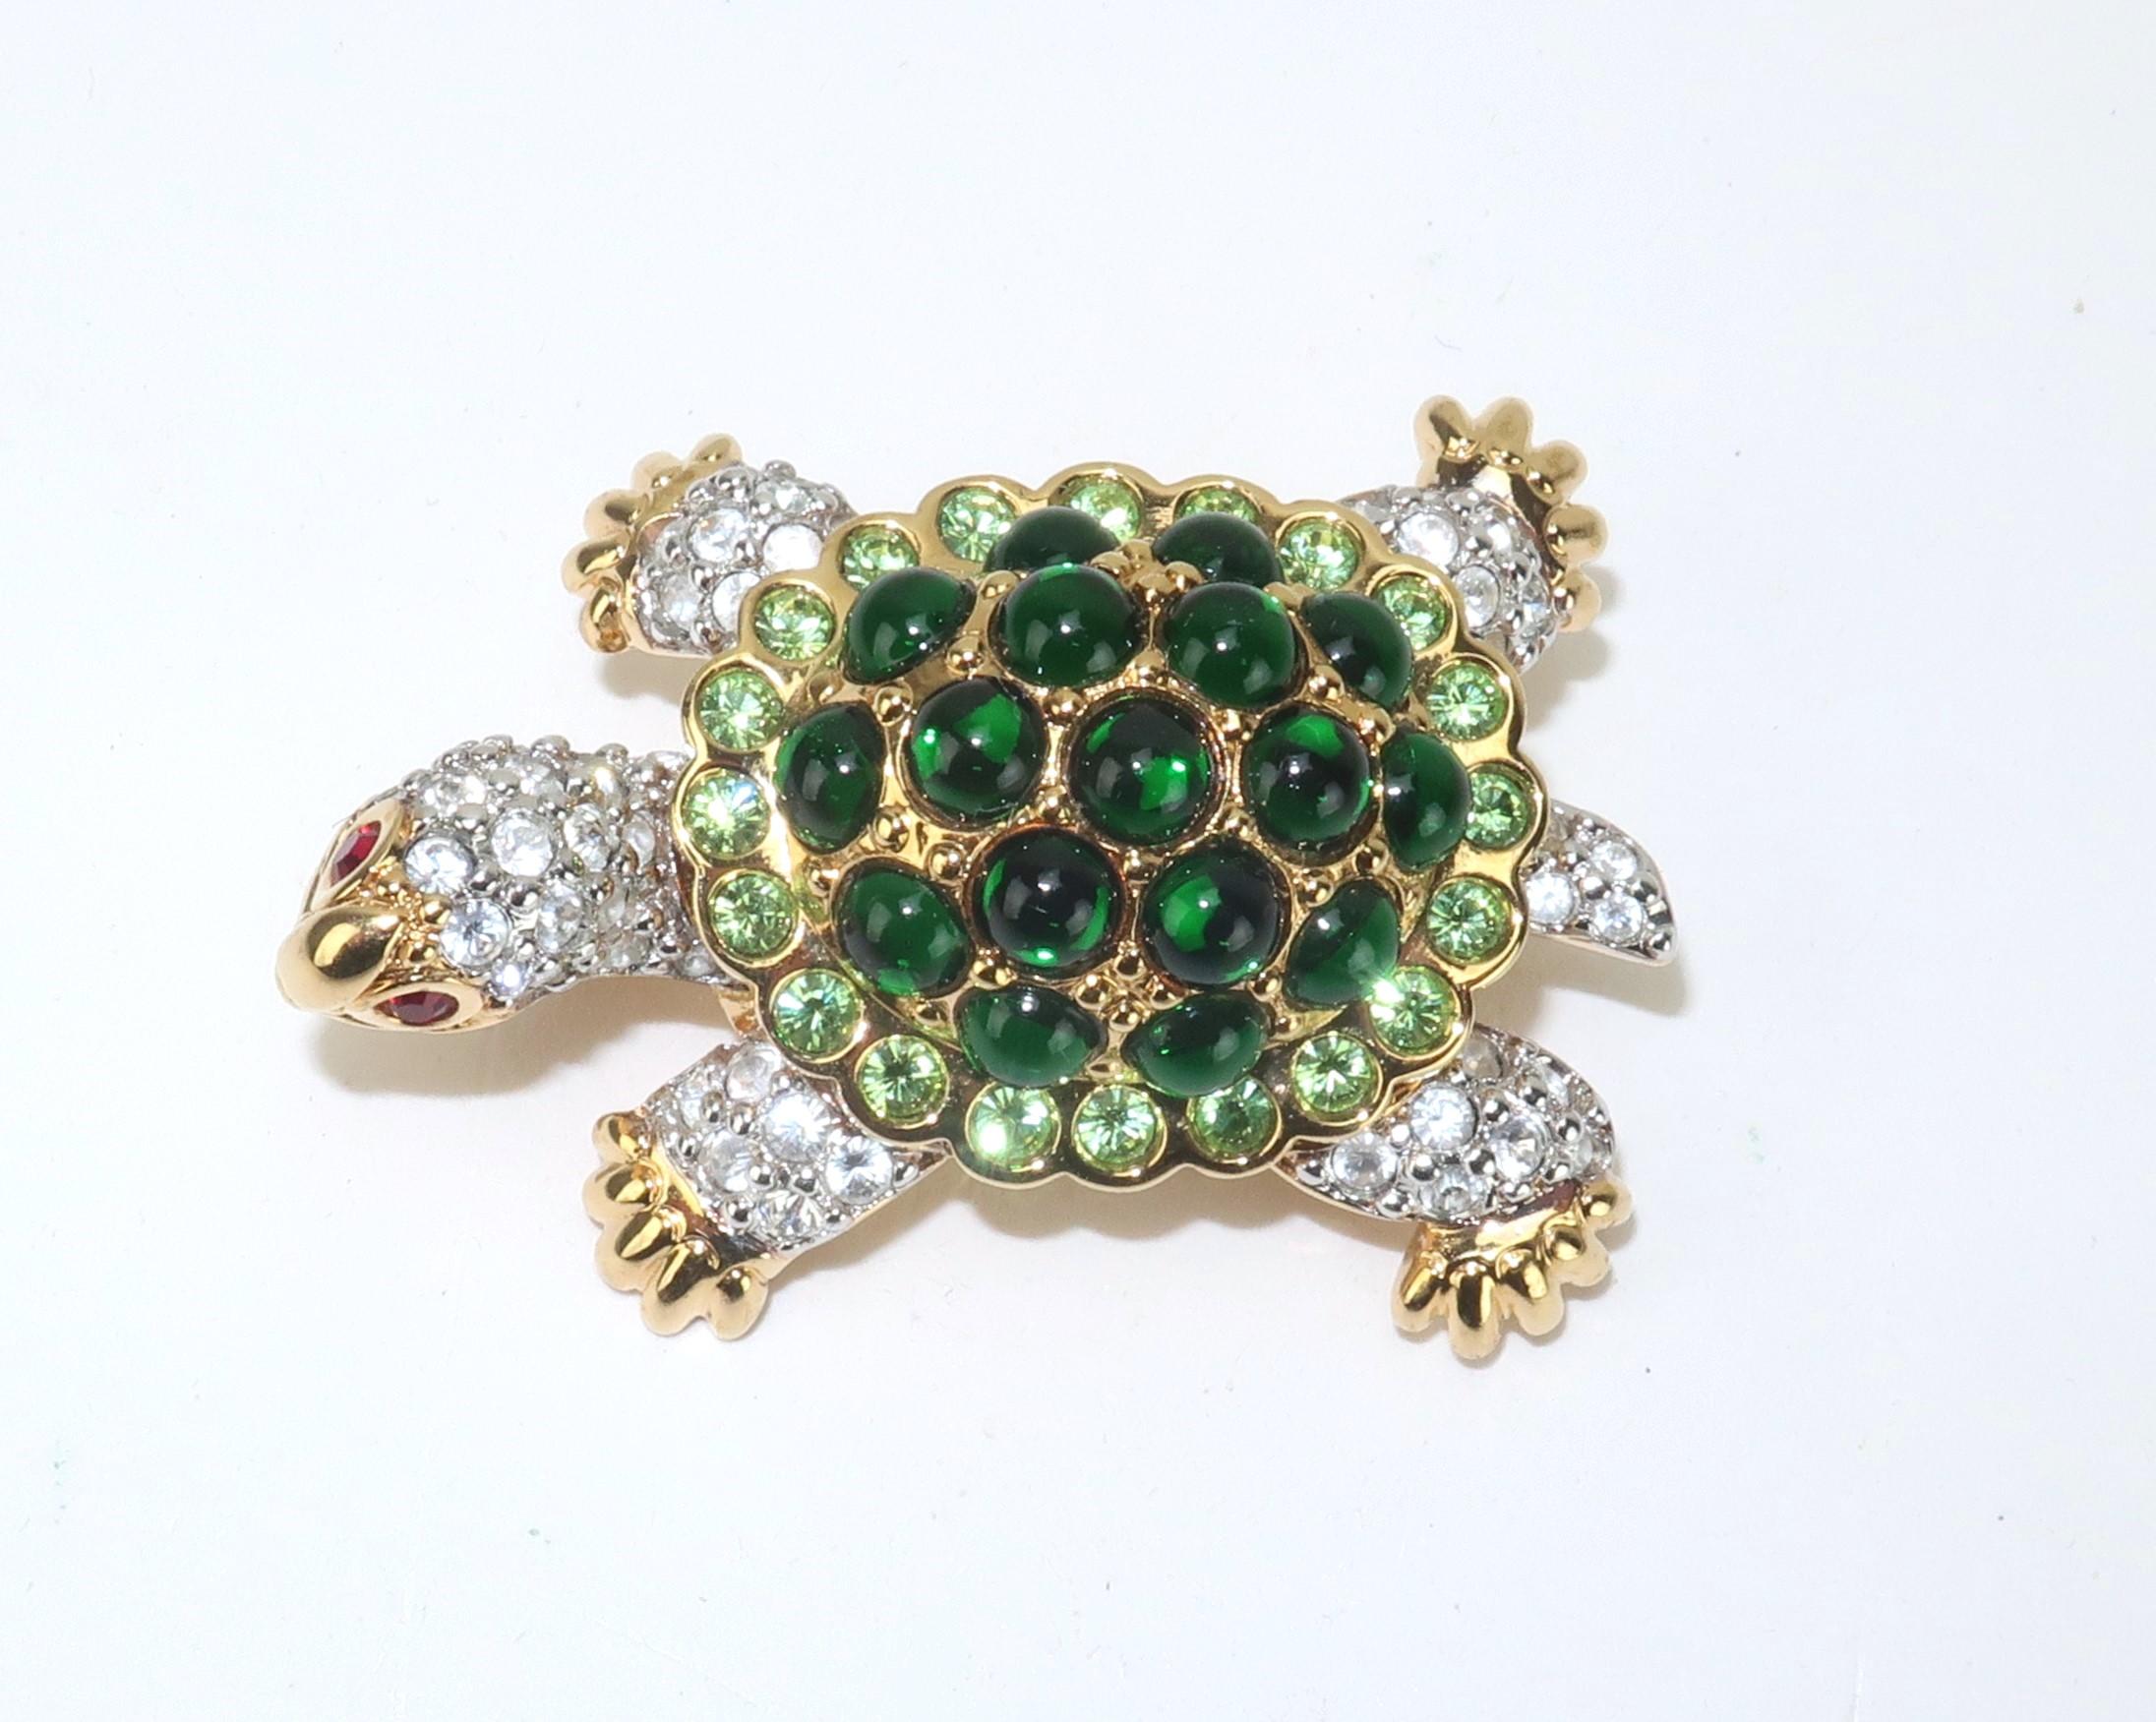 An adorable Swarovski turtle brooch loaded with personality and adorned with brilliant crystals, lime green rhinestones, green glass cabochons and ruby red crystal eyes. Set in a gold tone metal and outfitted with a straight pin and safety catch.